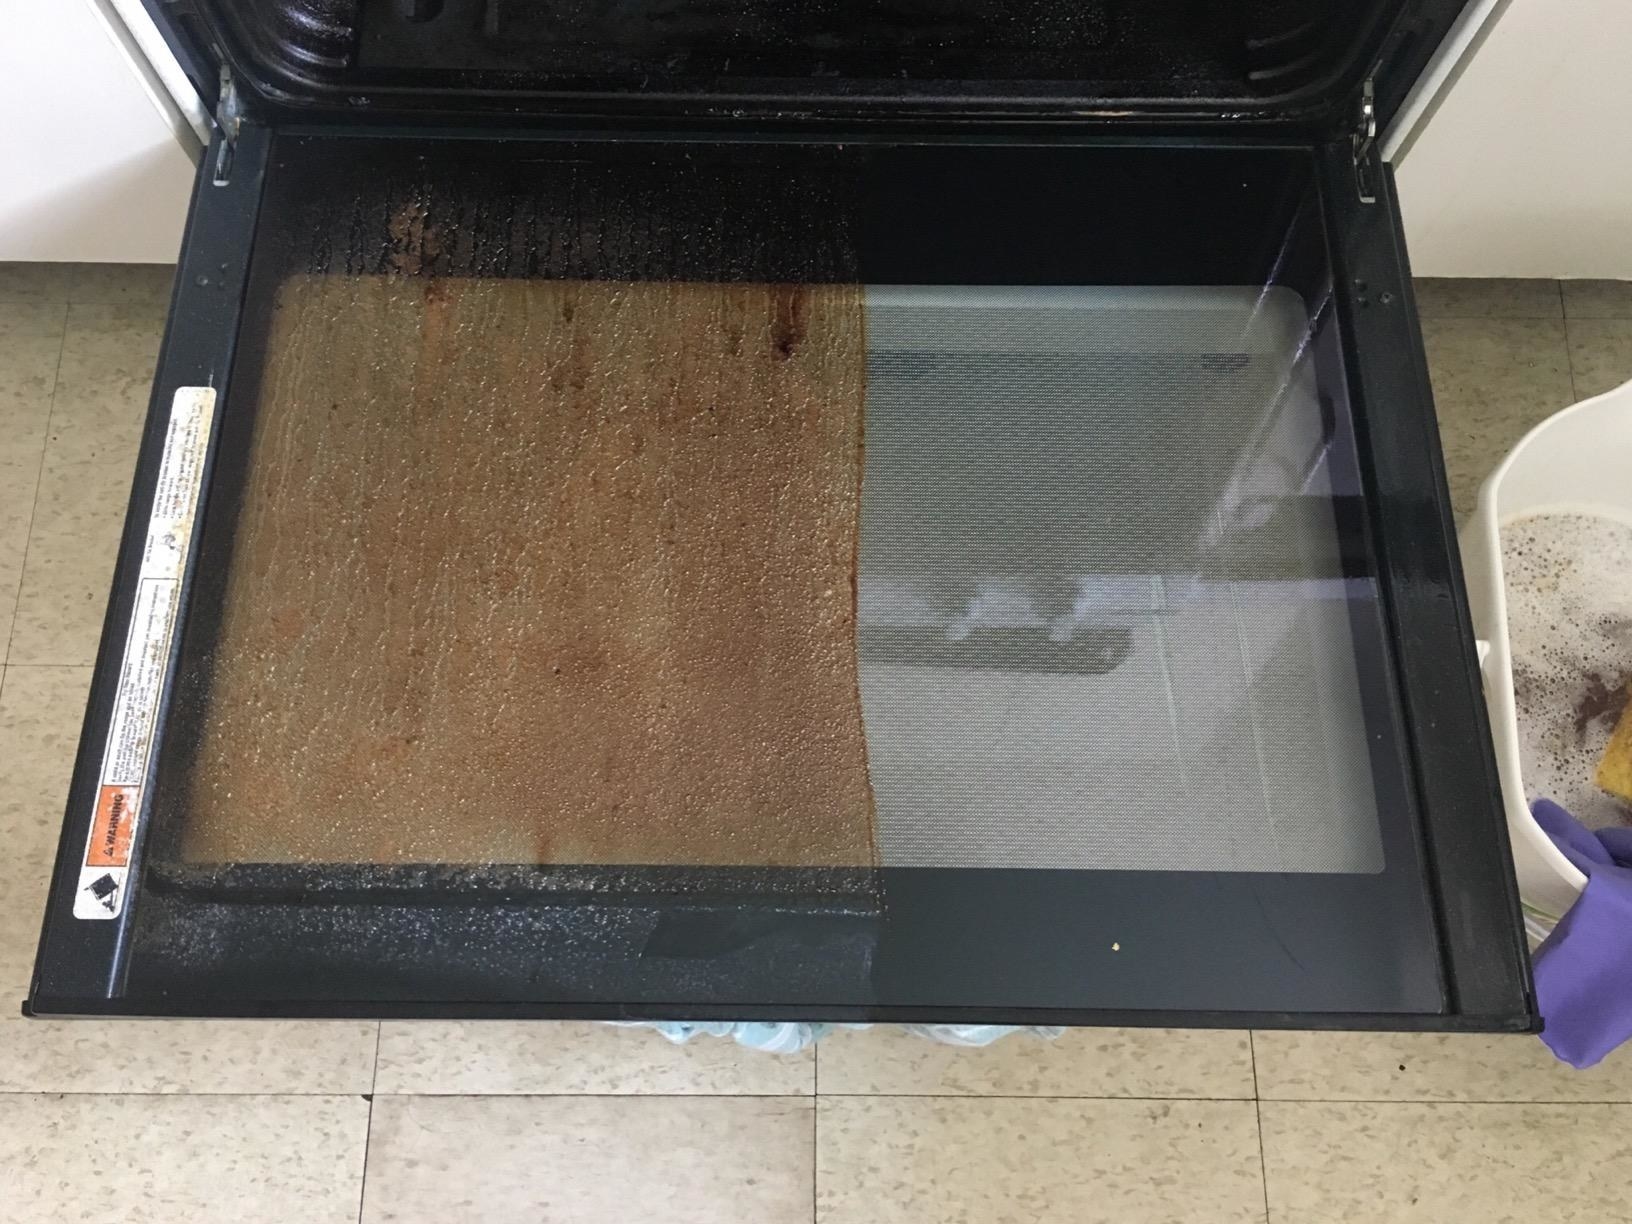 A customer&#x27;s oven door revealing caked on grime on one half of it and a clean surface on the other half